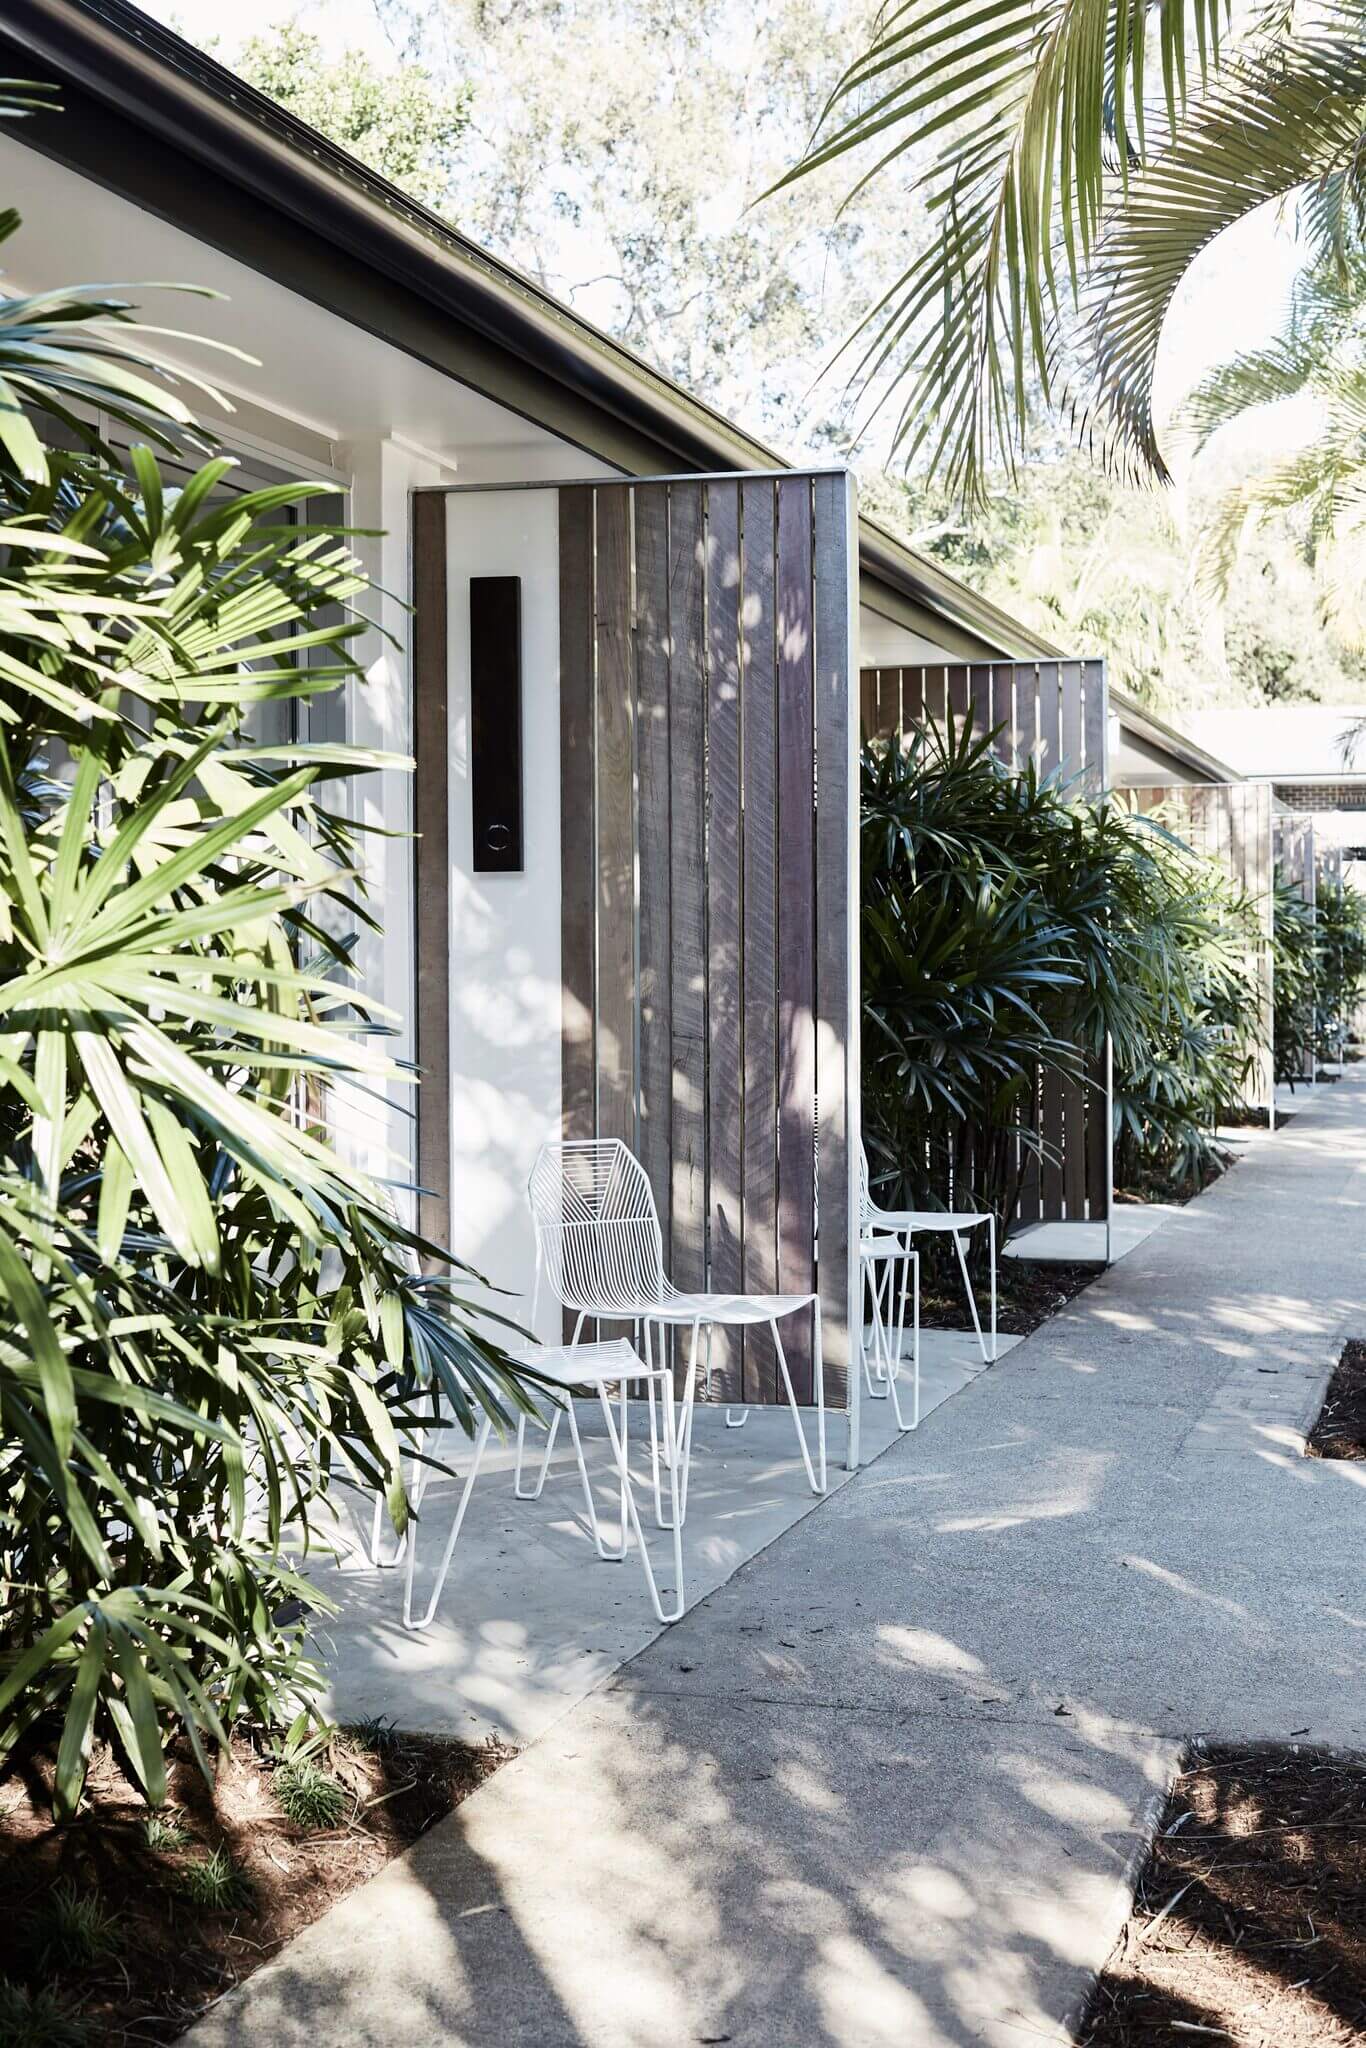 Private entrances to The Bower Suites at The Bower Byron Bay boutique hotel